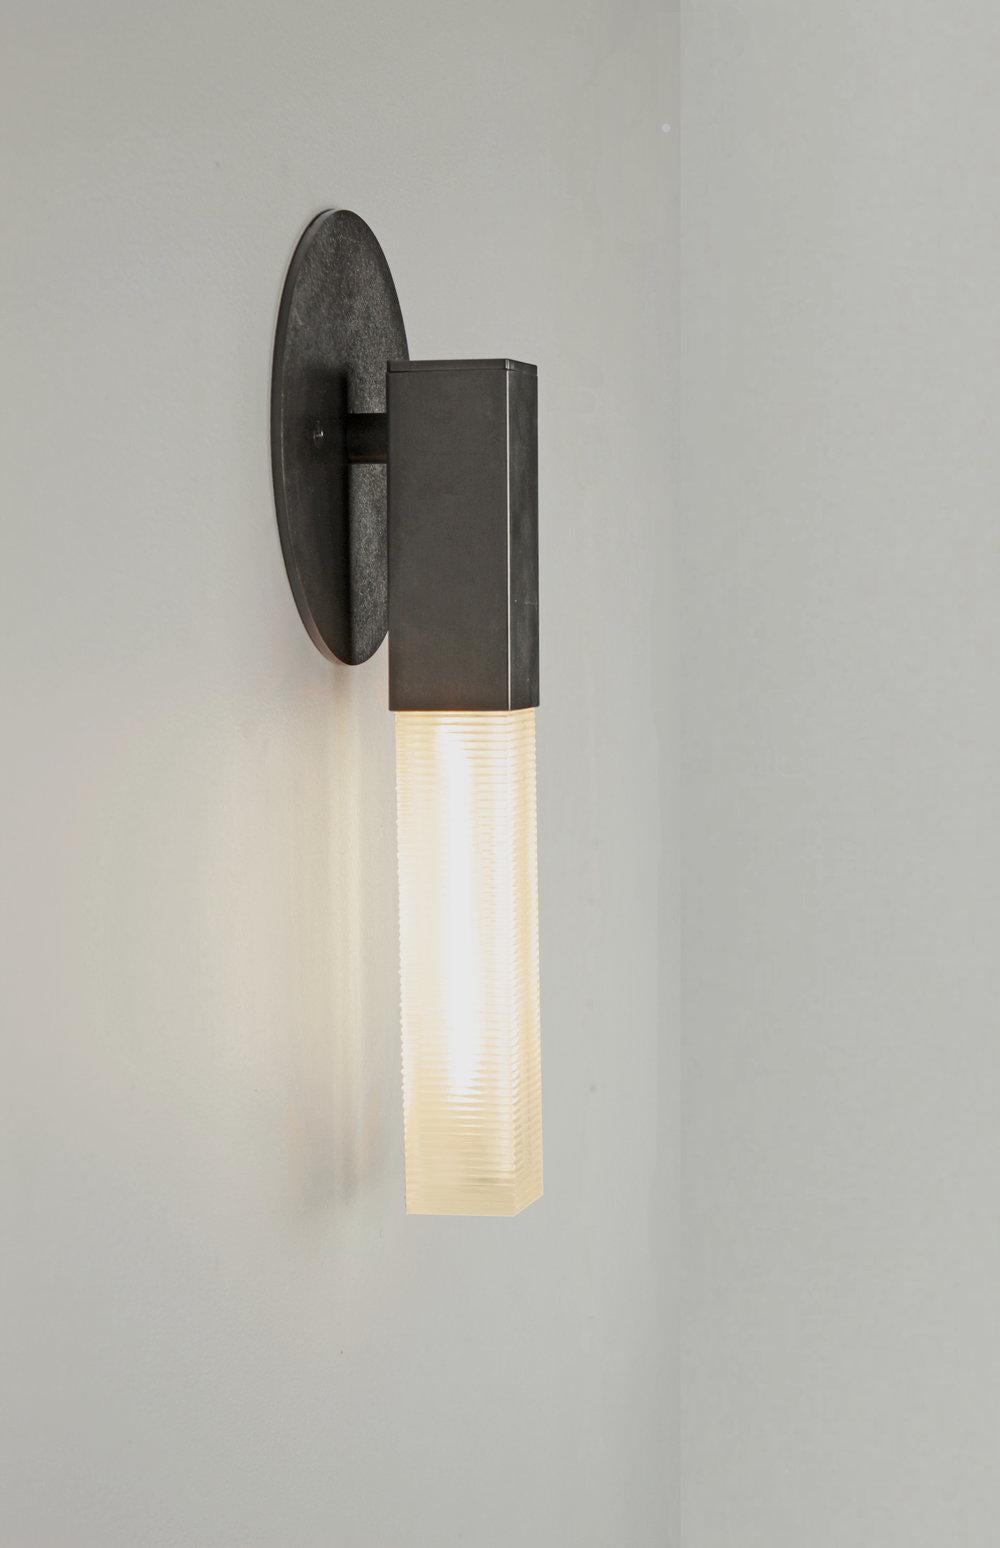 Daikon Studio  POST  Mini Sconce 

The Mini Sconce celebrates the poetic dialogue between light and form to create a fixture that leans into the timeless and iconic. Meticulously crafted by hand in our studios. Horizontal or vertical